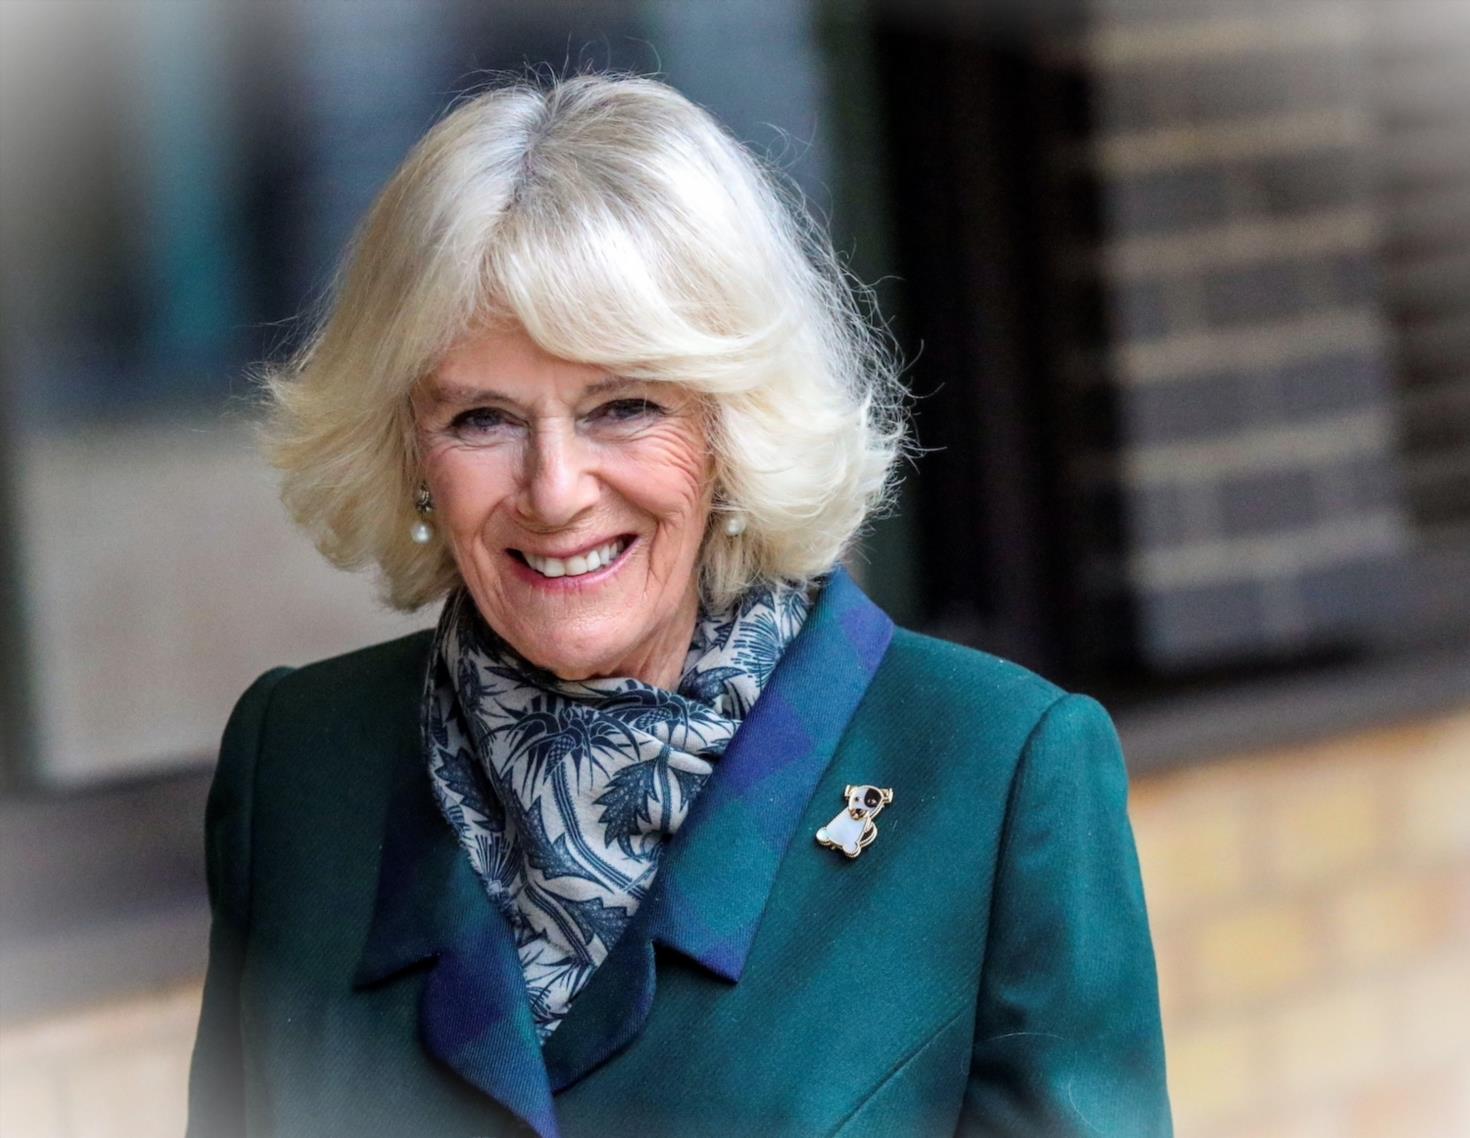 Camilla to be Officially Named Queen Camilla at King Charles IIIszfFqDt 4